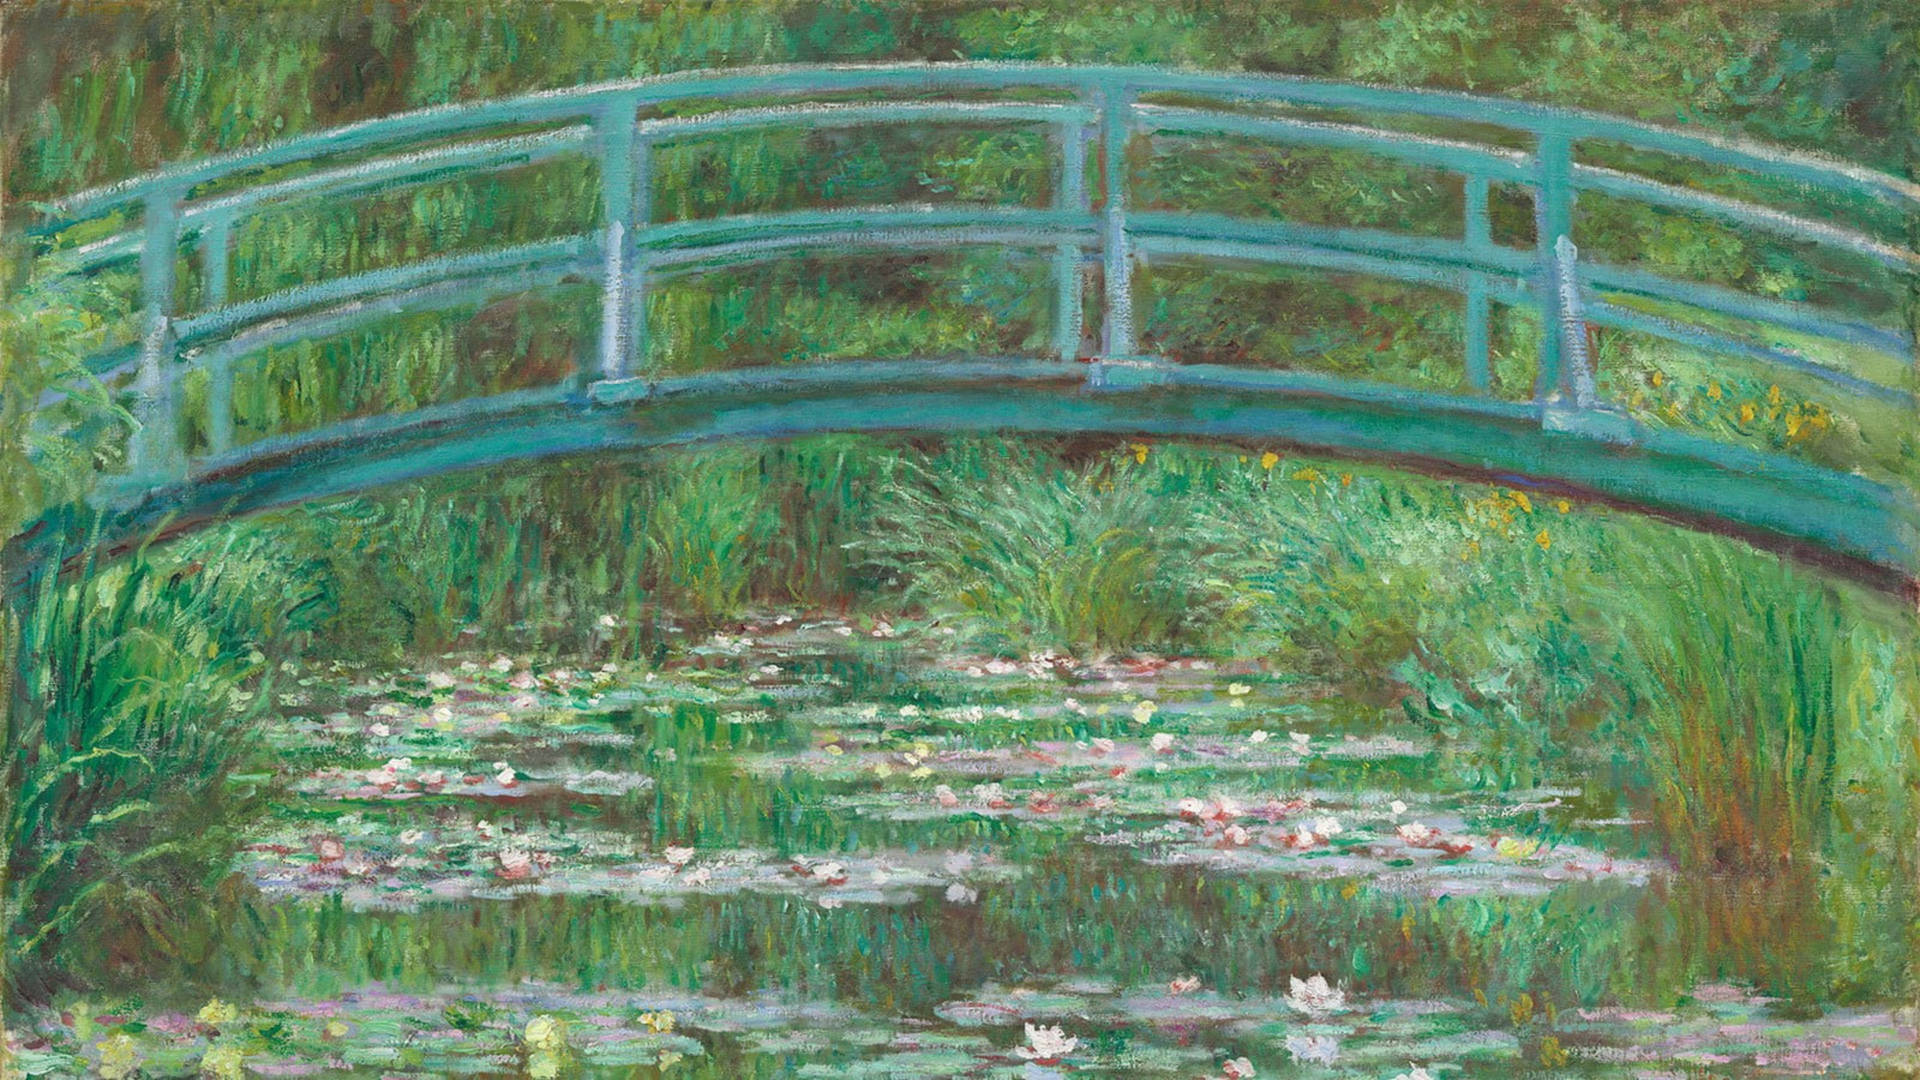 Claude Monet’s The Water Lily Pond